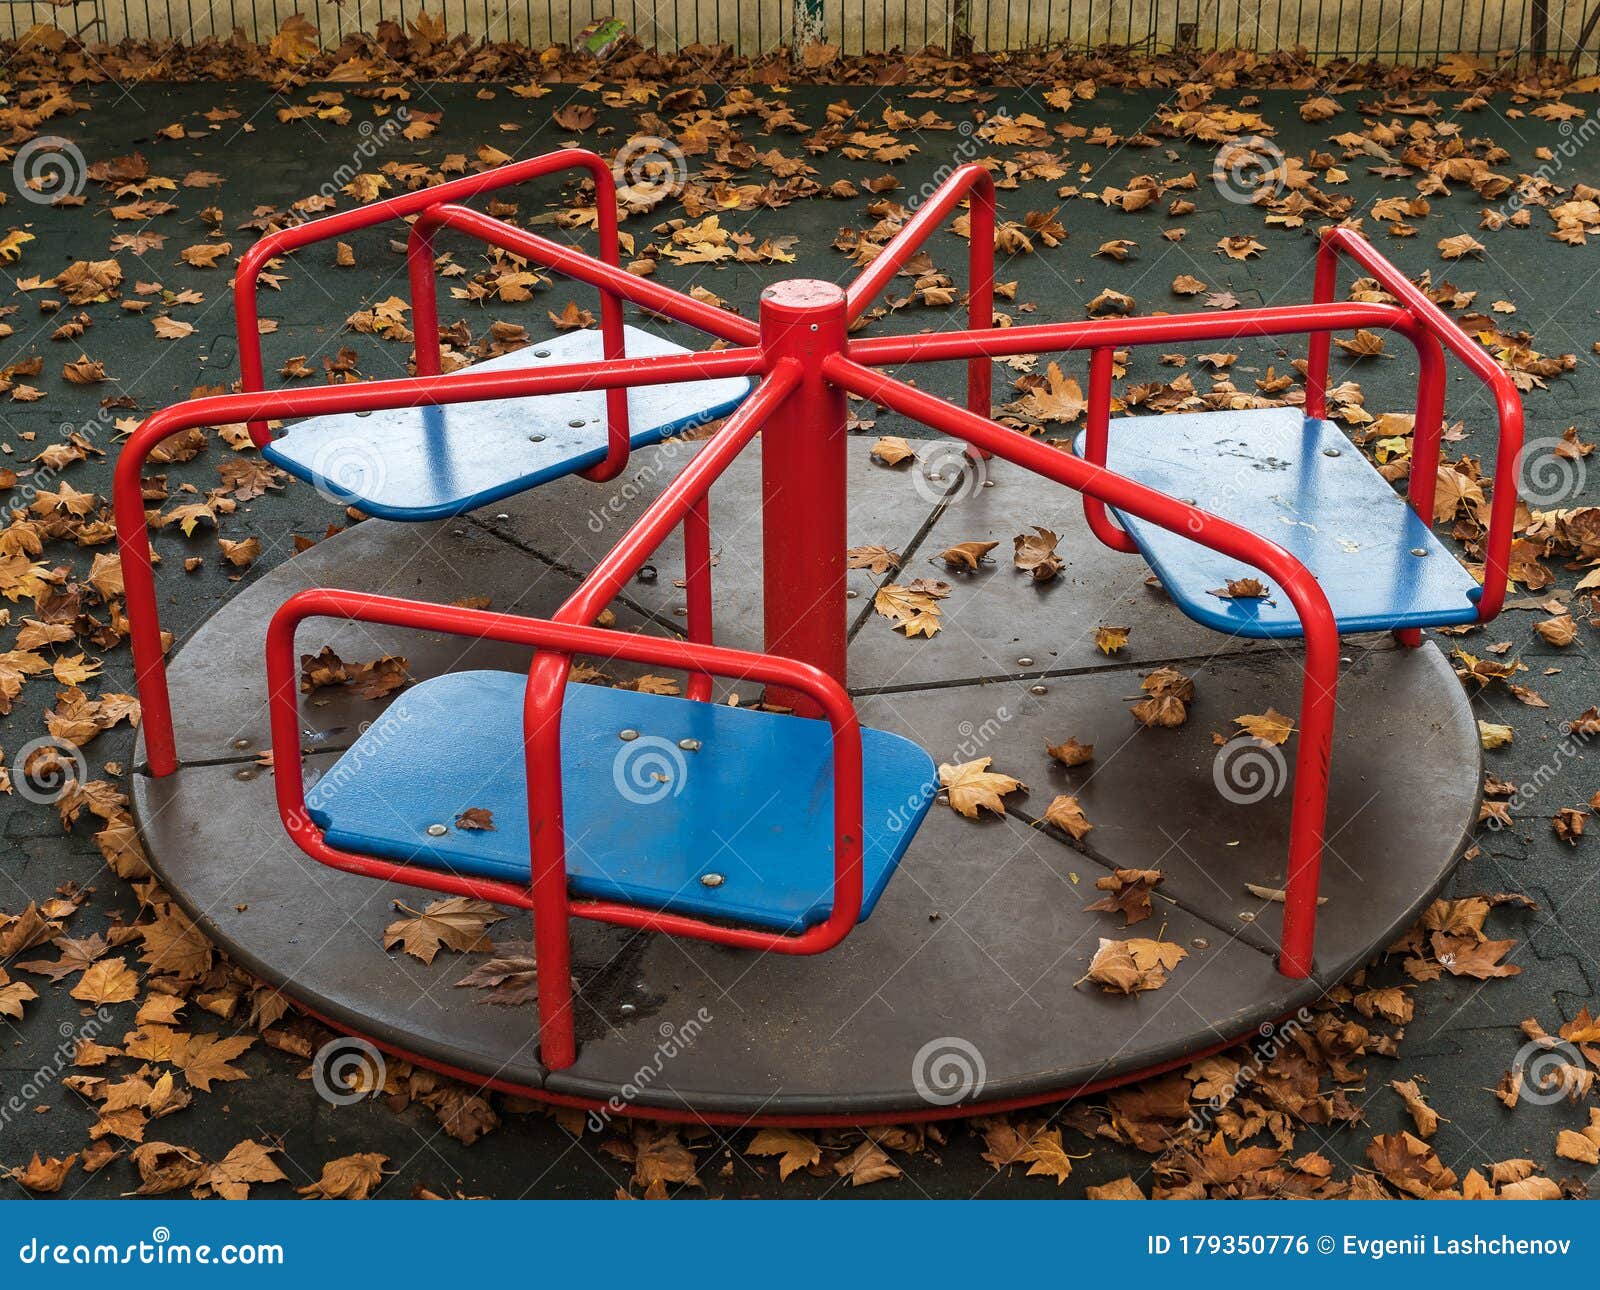 Round Swing in the Playground Covered with Yellow Leaves Stock Photo -  Image of circle, happiness: 179350776